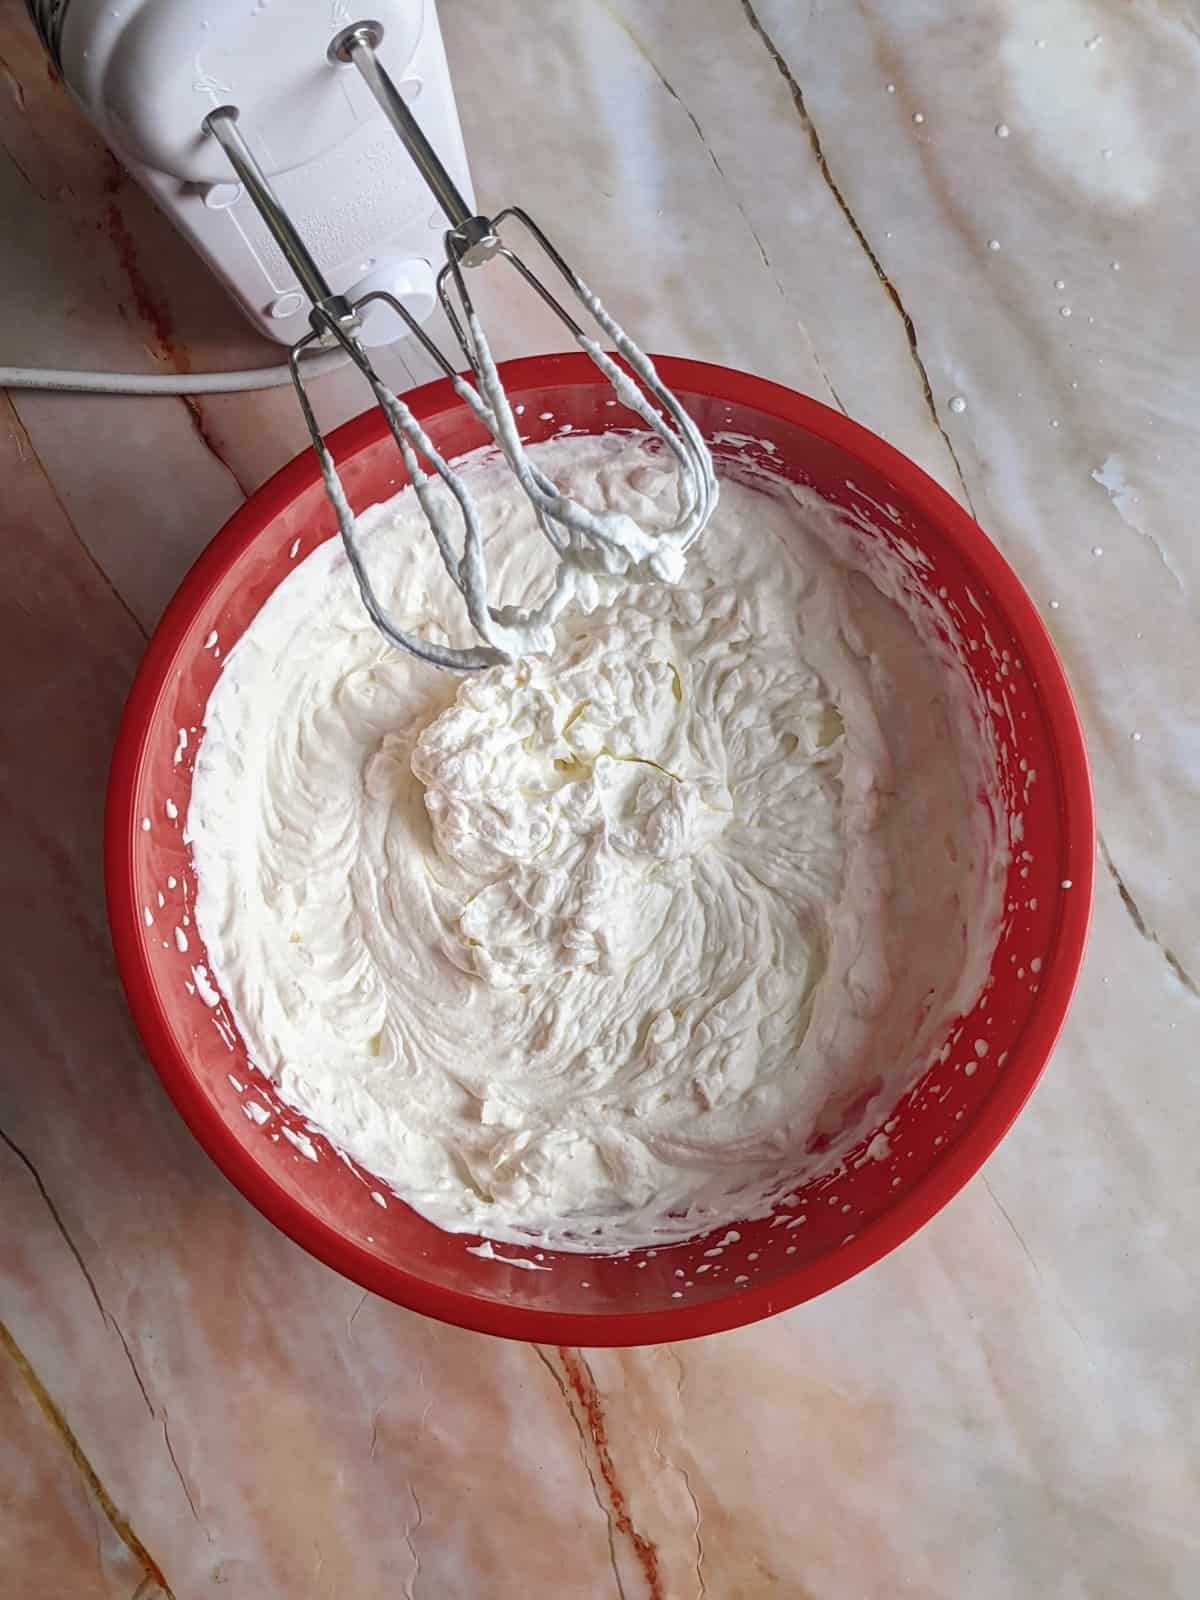 Whipped cream is ready to be used.